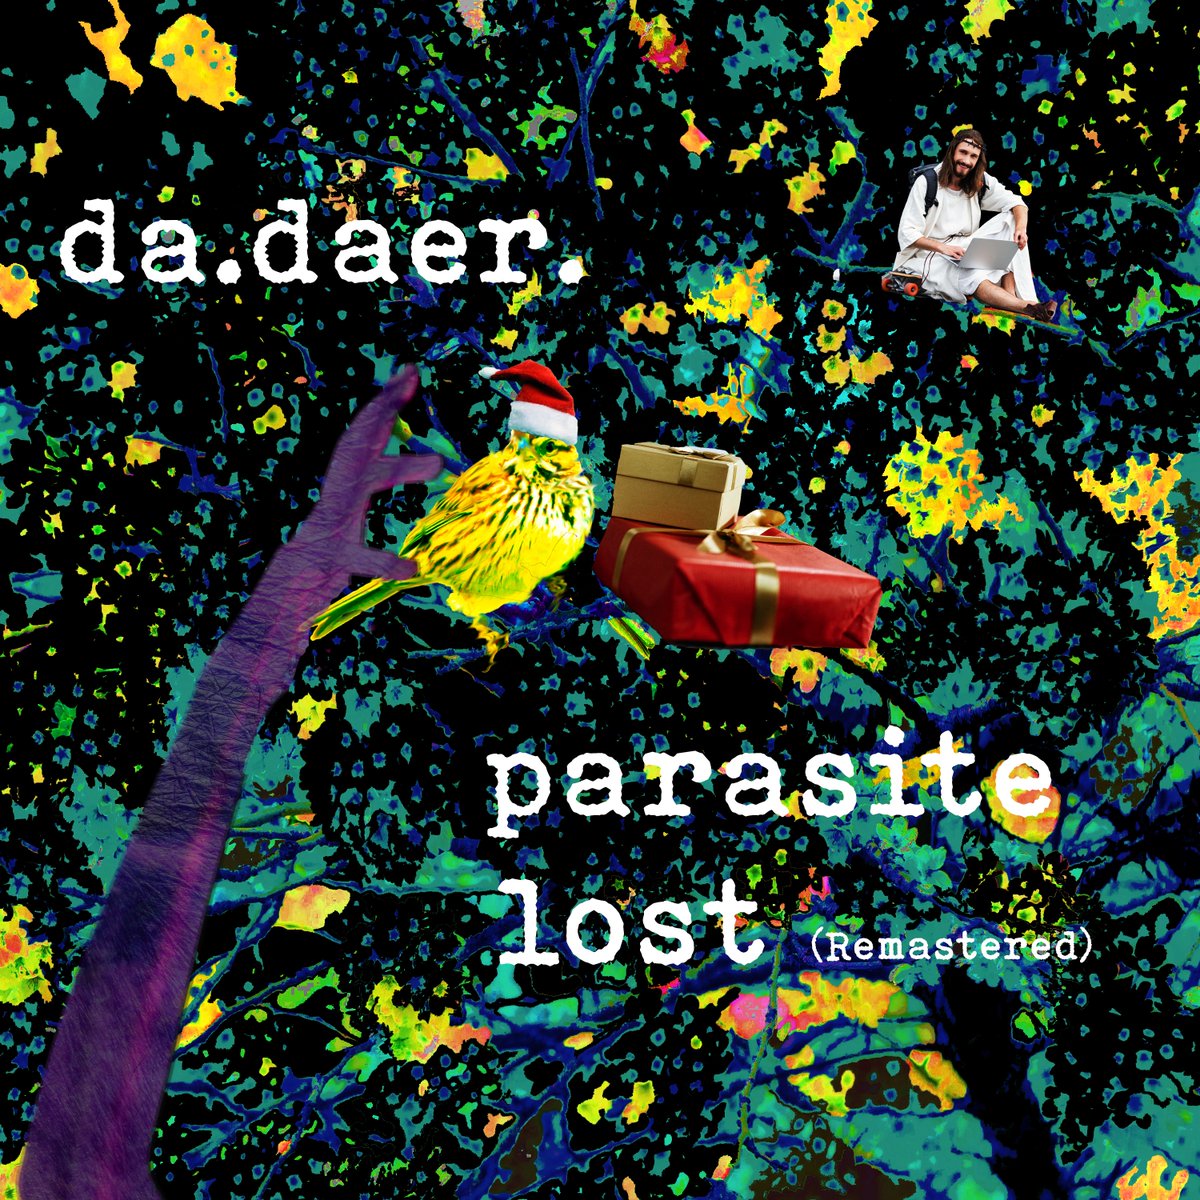 Ho-ho-oh-no! What's this?

On Christmas Day, a remaster of Parasite Lost drops on streaming!

(Although, we hear you can buy/listen to it early if you go to our Bandcamp page.)

#postpunk #noisepunk #newmusic #postnoisepunk #punk #garage #shoegaze #indie